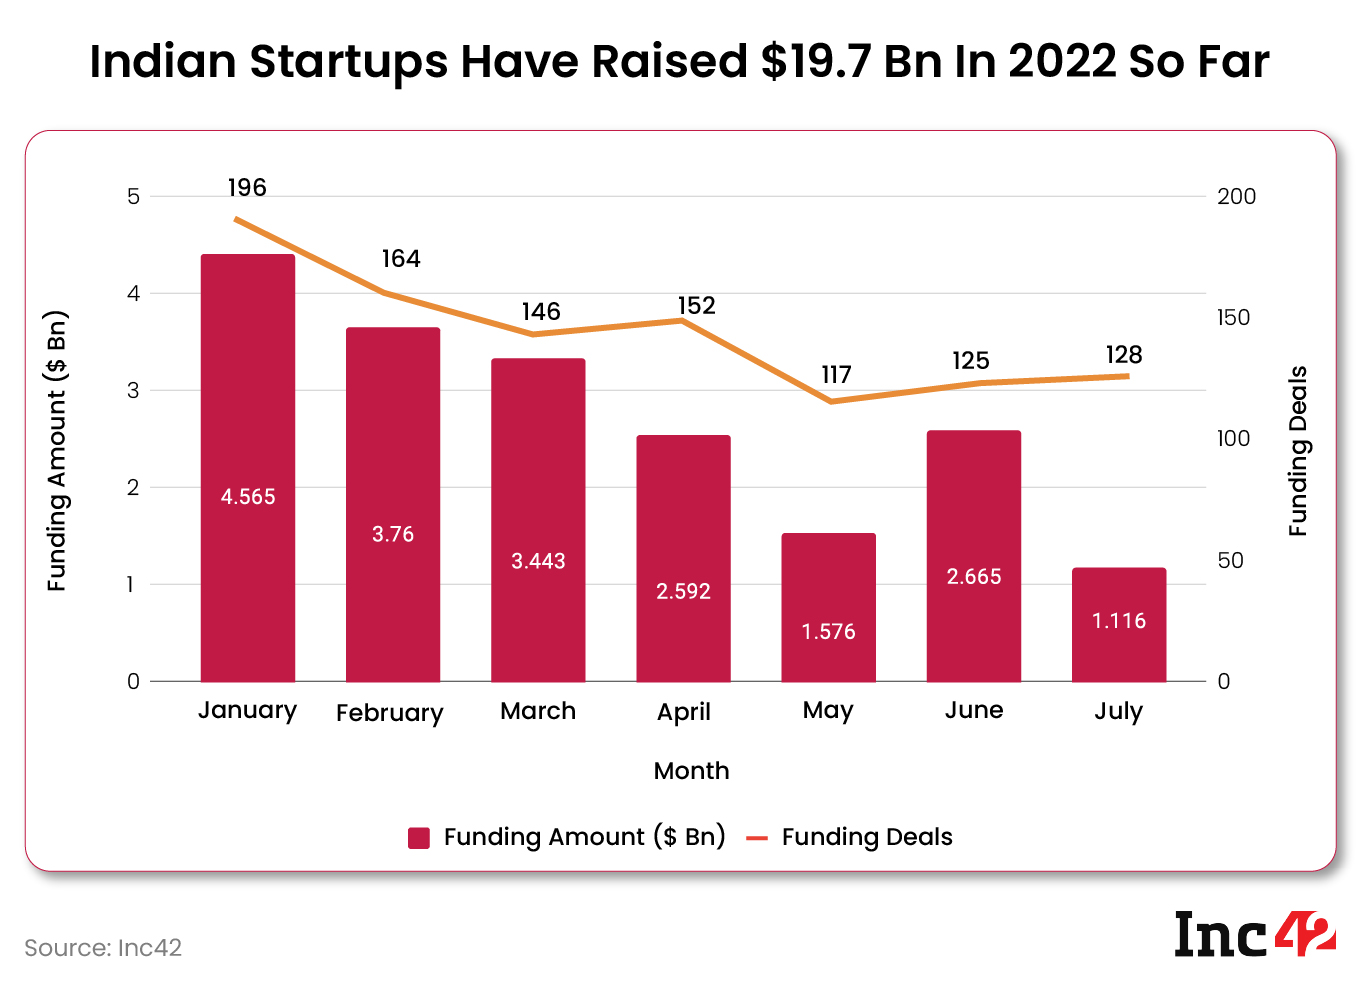 Indian startups have raised $19.7 Bn so far in 2022